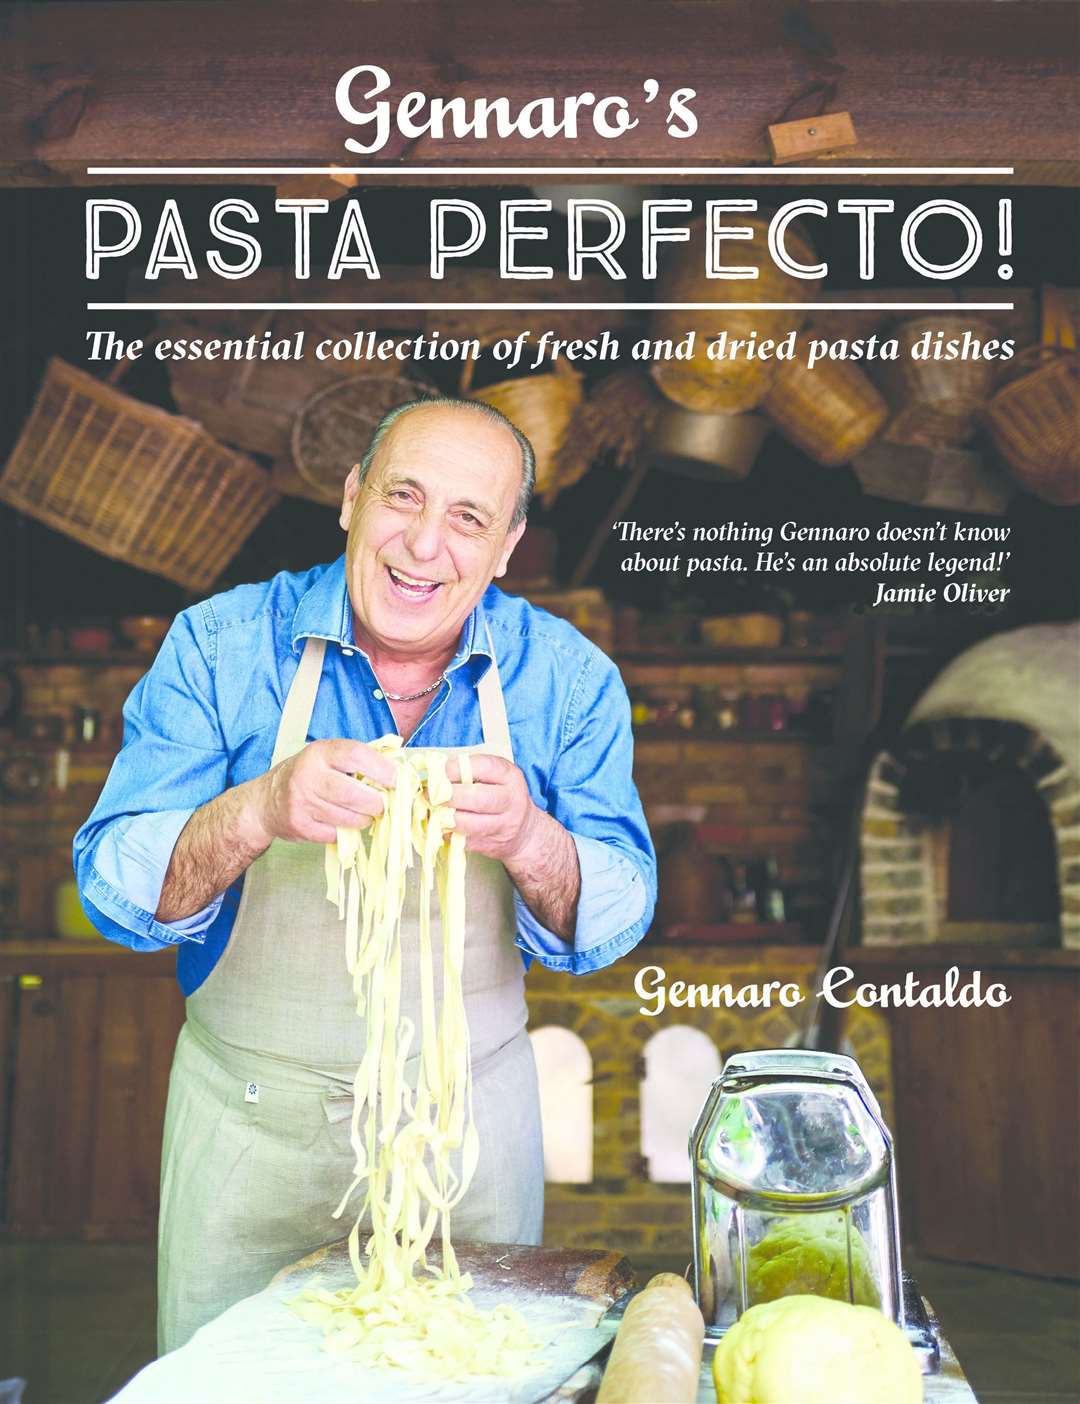 Gennaro’s Pasta Perfecto! by Gennaro Contaldo, is published by Pavilion Books, priced £18.99. Available now.